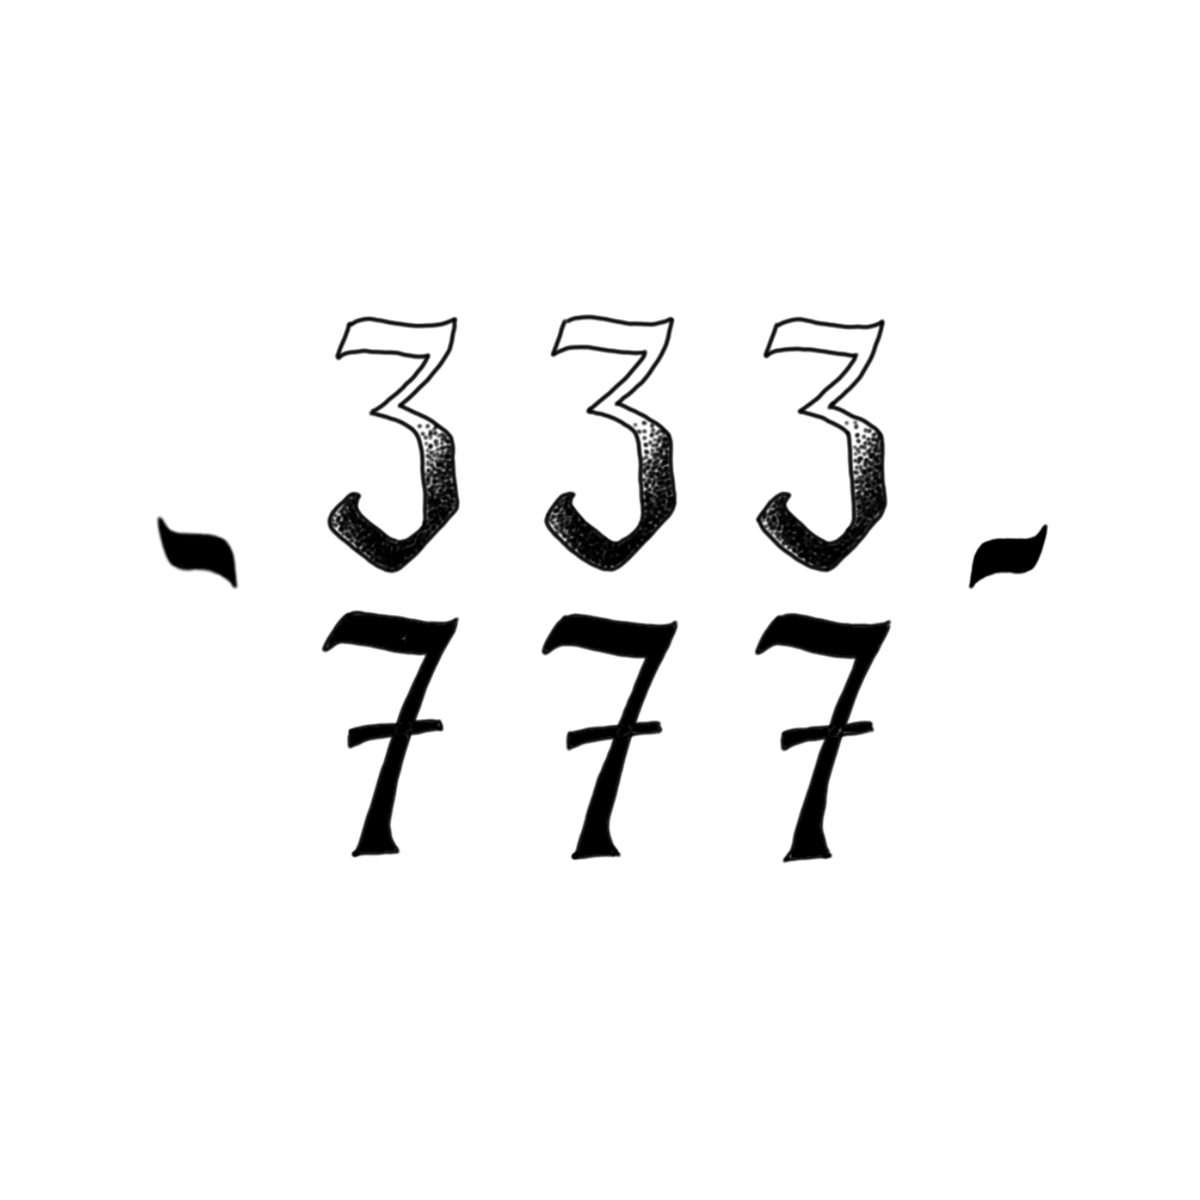 Number design angel numbers Digital Drawing tattoo design monochrome lucky numbers